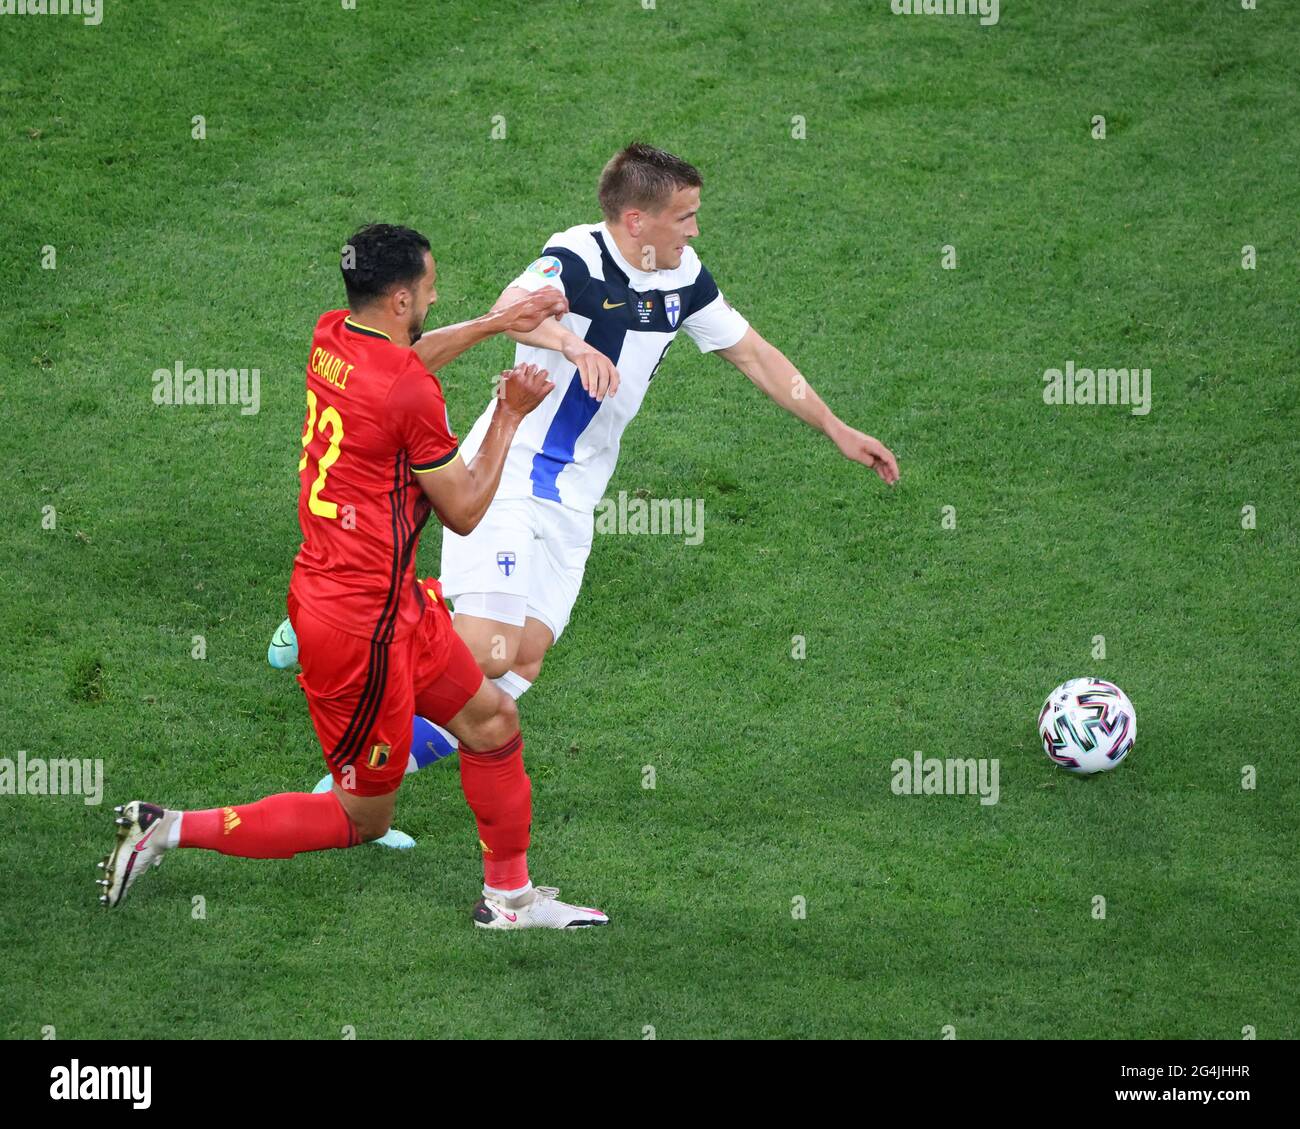 Saint Petersburg, Russia. 21st June, 2021. Nacer Chadli (22) of Belgium and Robin Lod (8) of Finland are seen in action during the European championship EURO 2020 between Belgium and Finland at Gazprom Arena.(Final Score; Finland 0:2 Belgium). (Photo by Maksim Konstantinov/SOPA Images/Sipa USA) Credit: Sipa USA/Alamy Live News Stock Photo